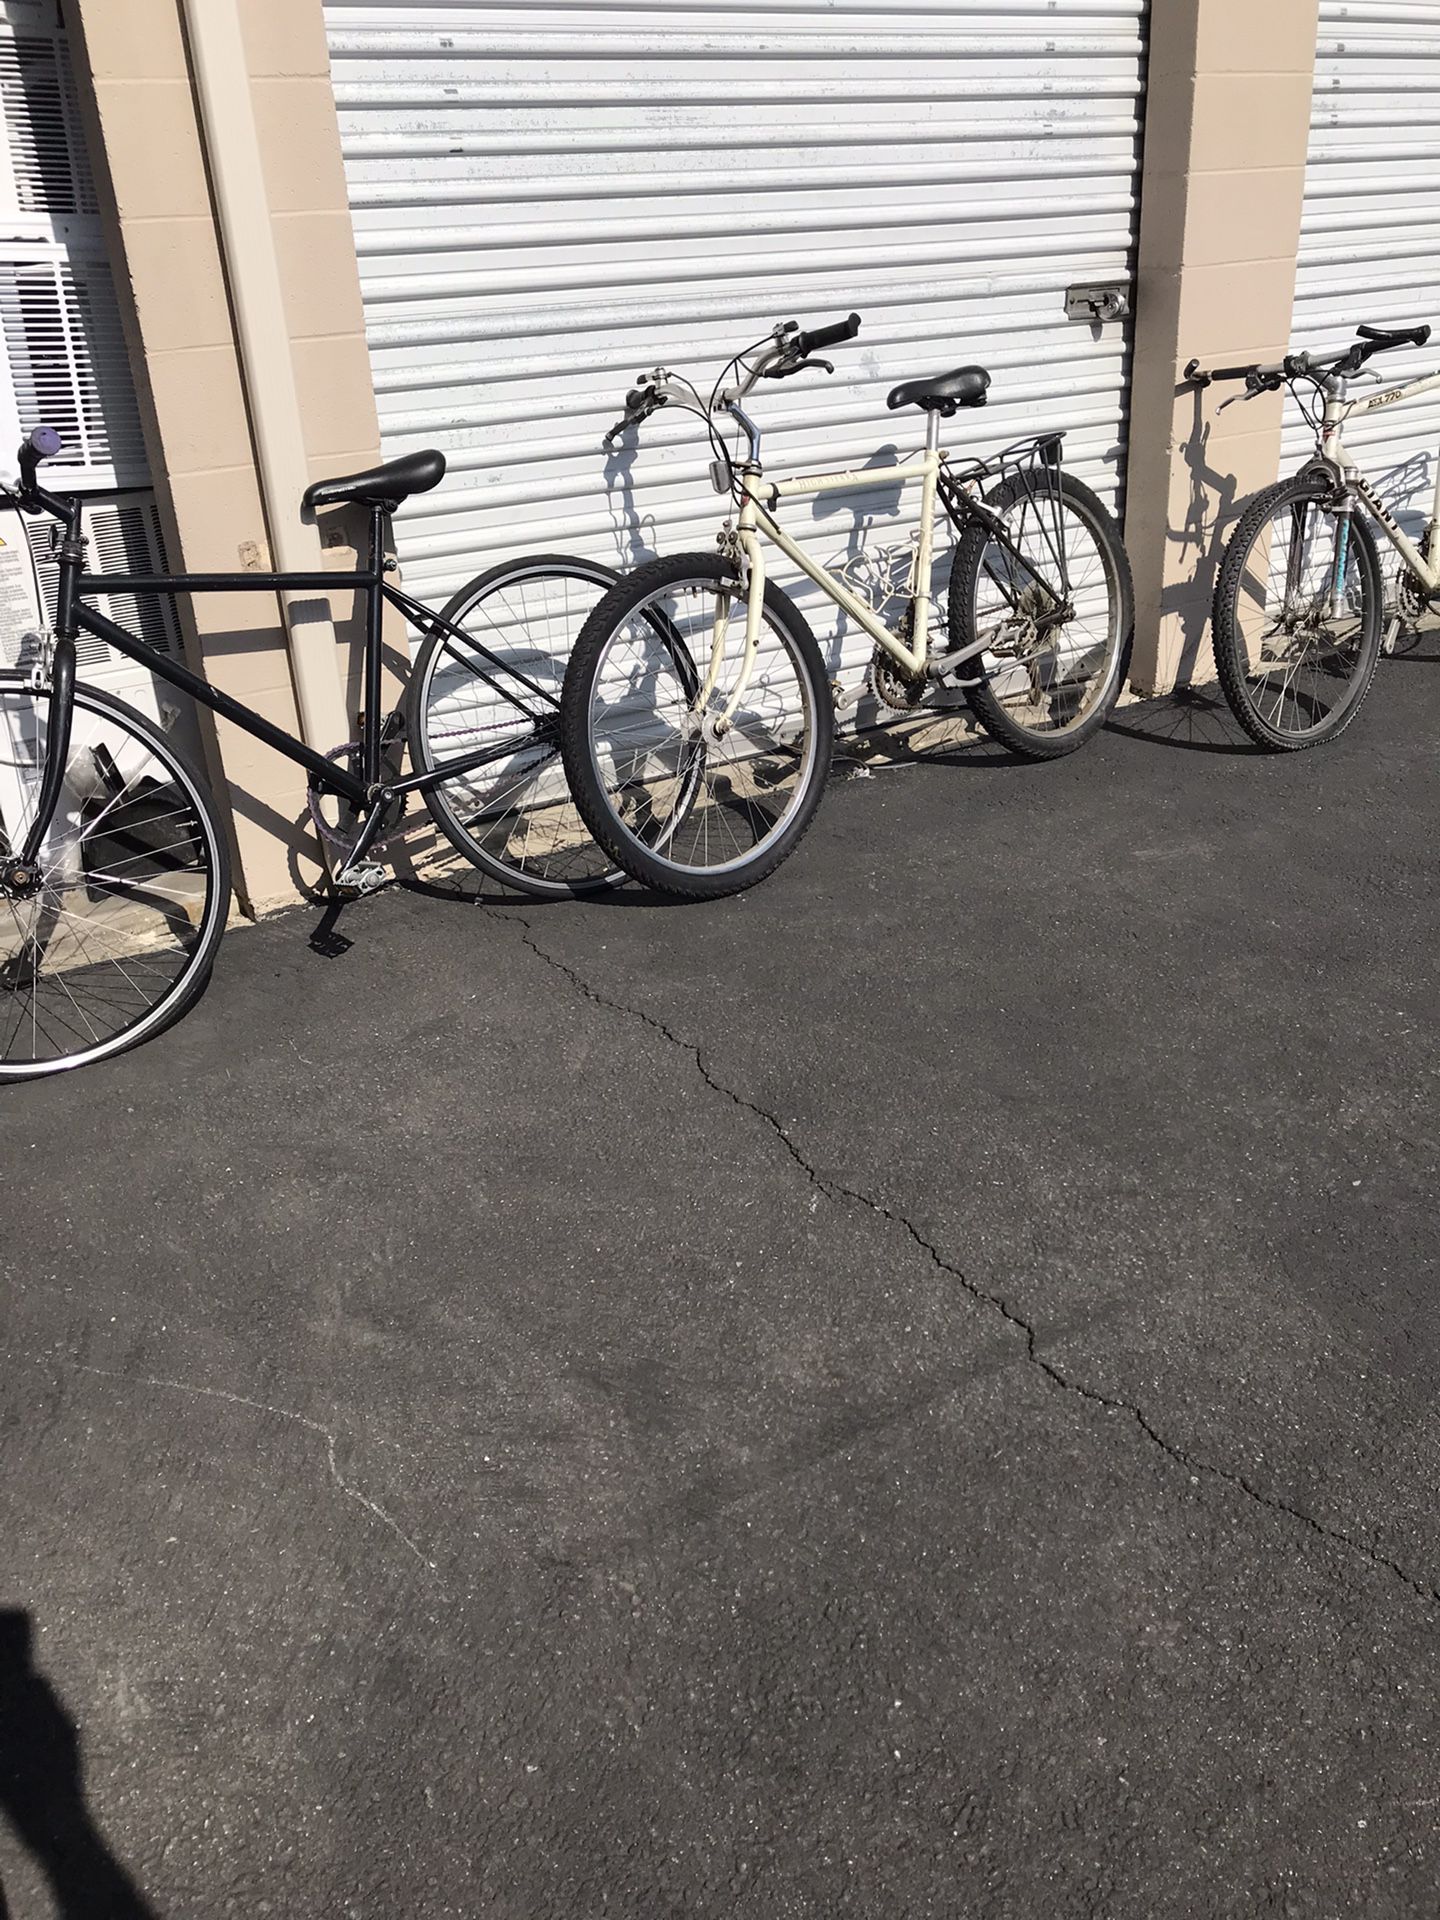 3 Bikes For $100